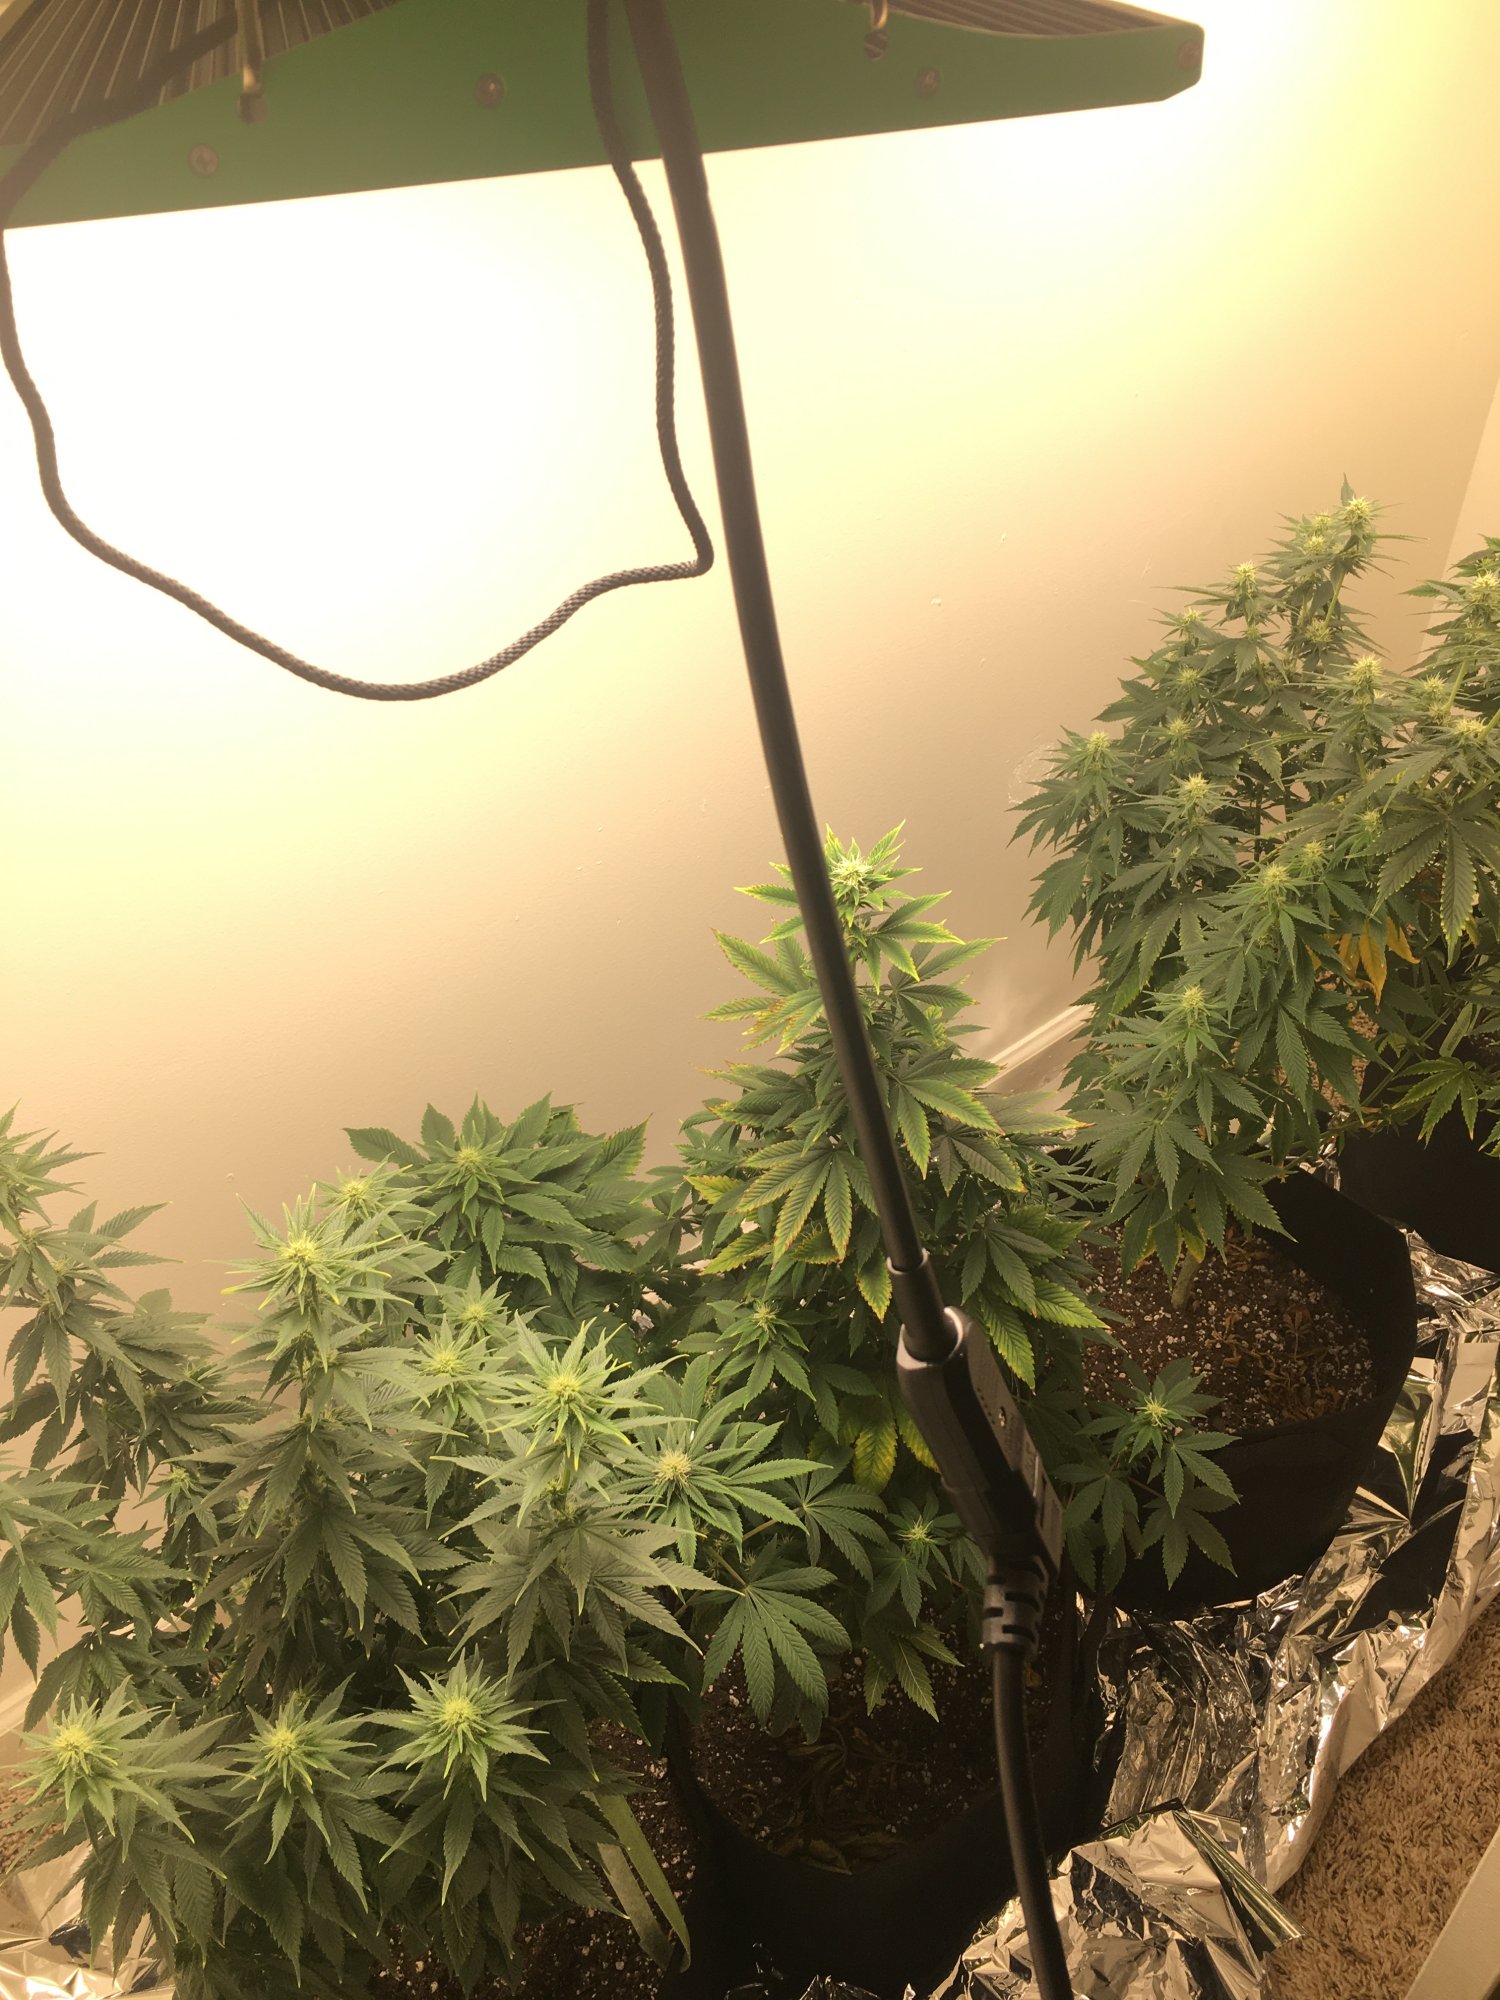 Im back for my second grow i need help in early flowering 2